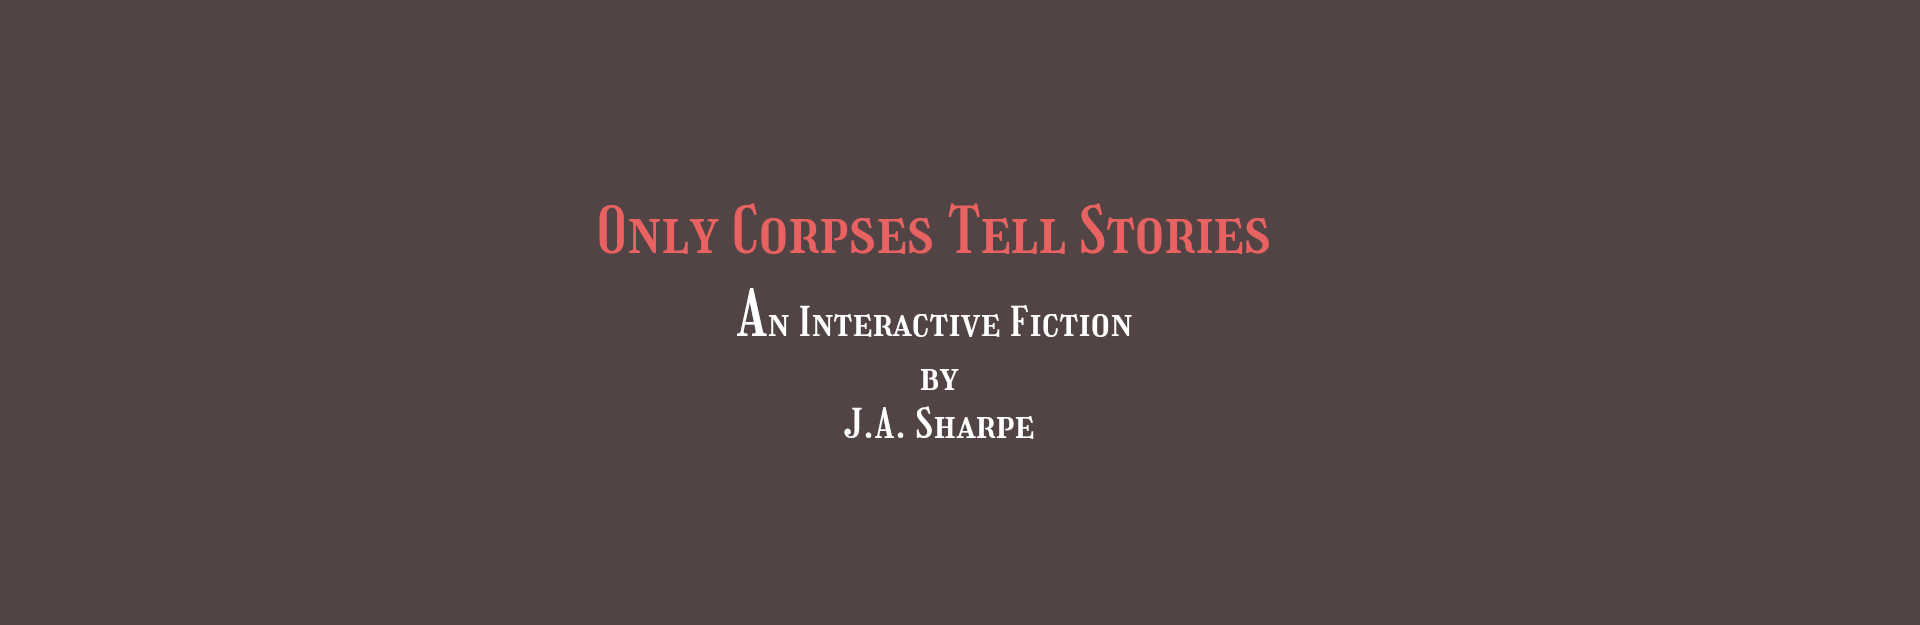 Only Corpses Tell Stories